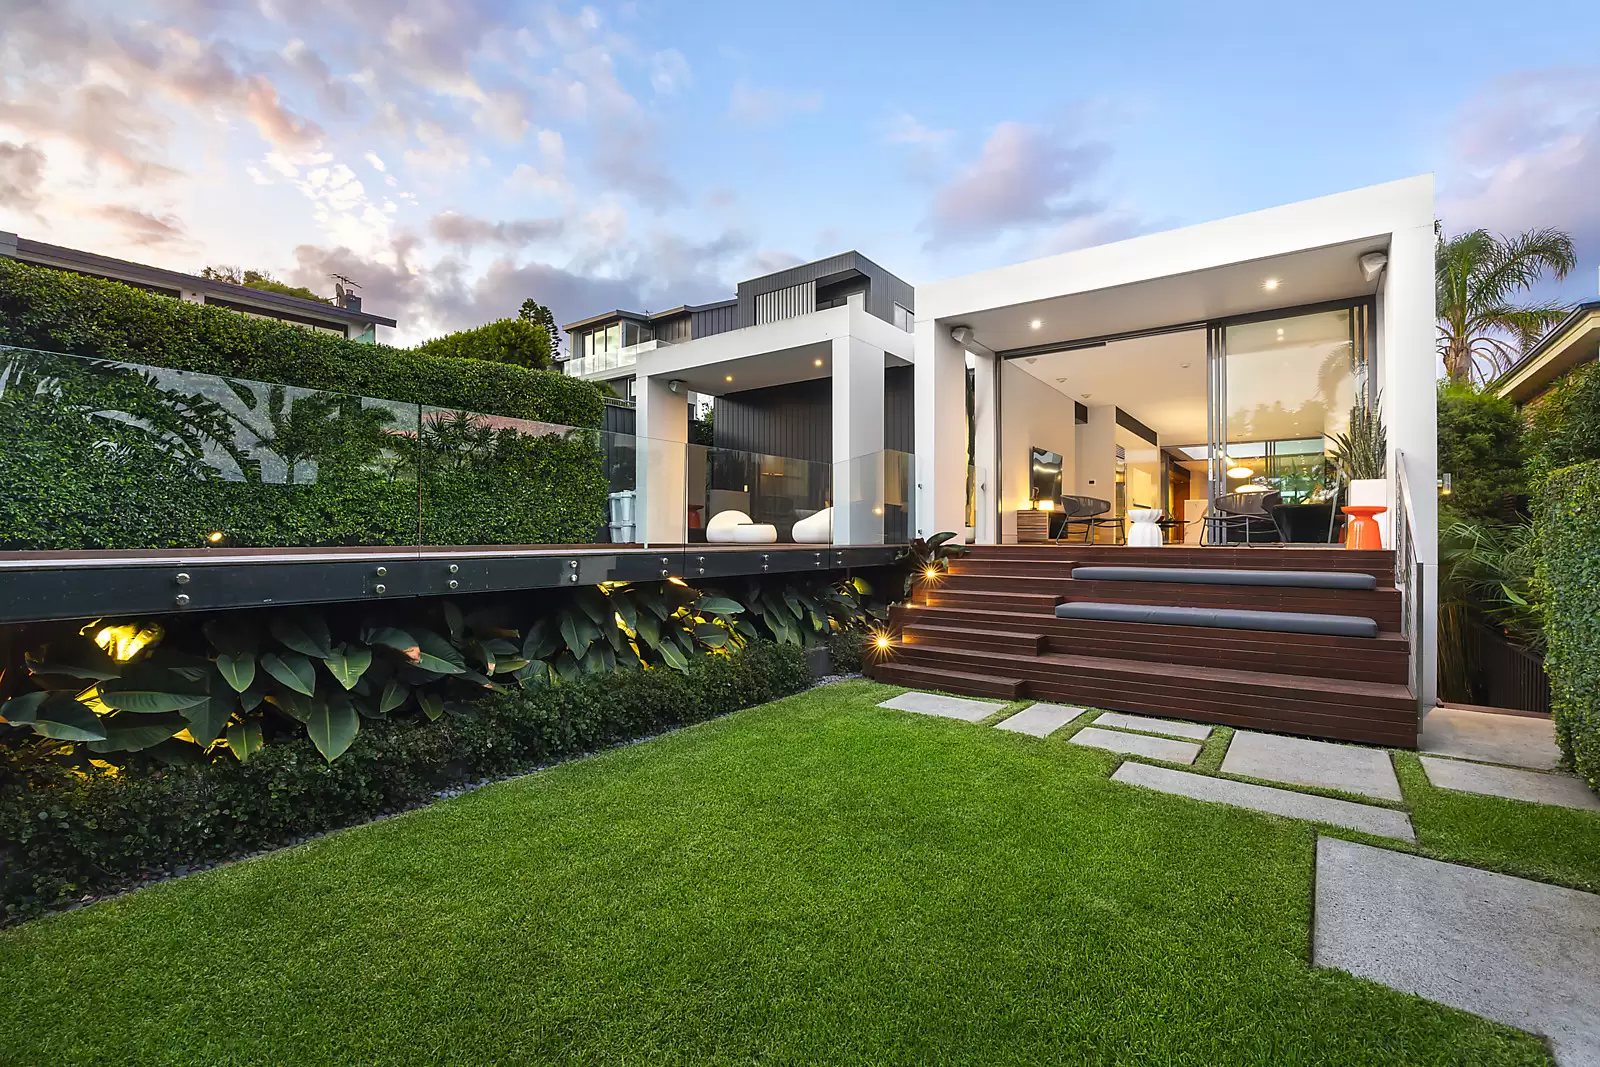 Photo #17: 7 Edgecliffe Avenue, South Coogee - Auction by Sydney Sotheby's International Realty